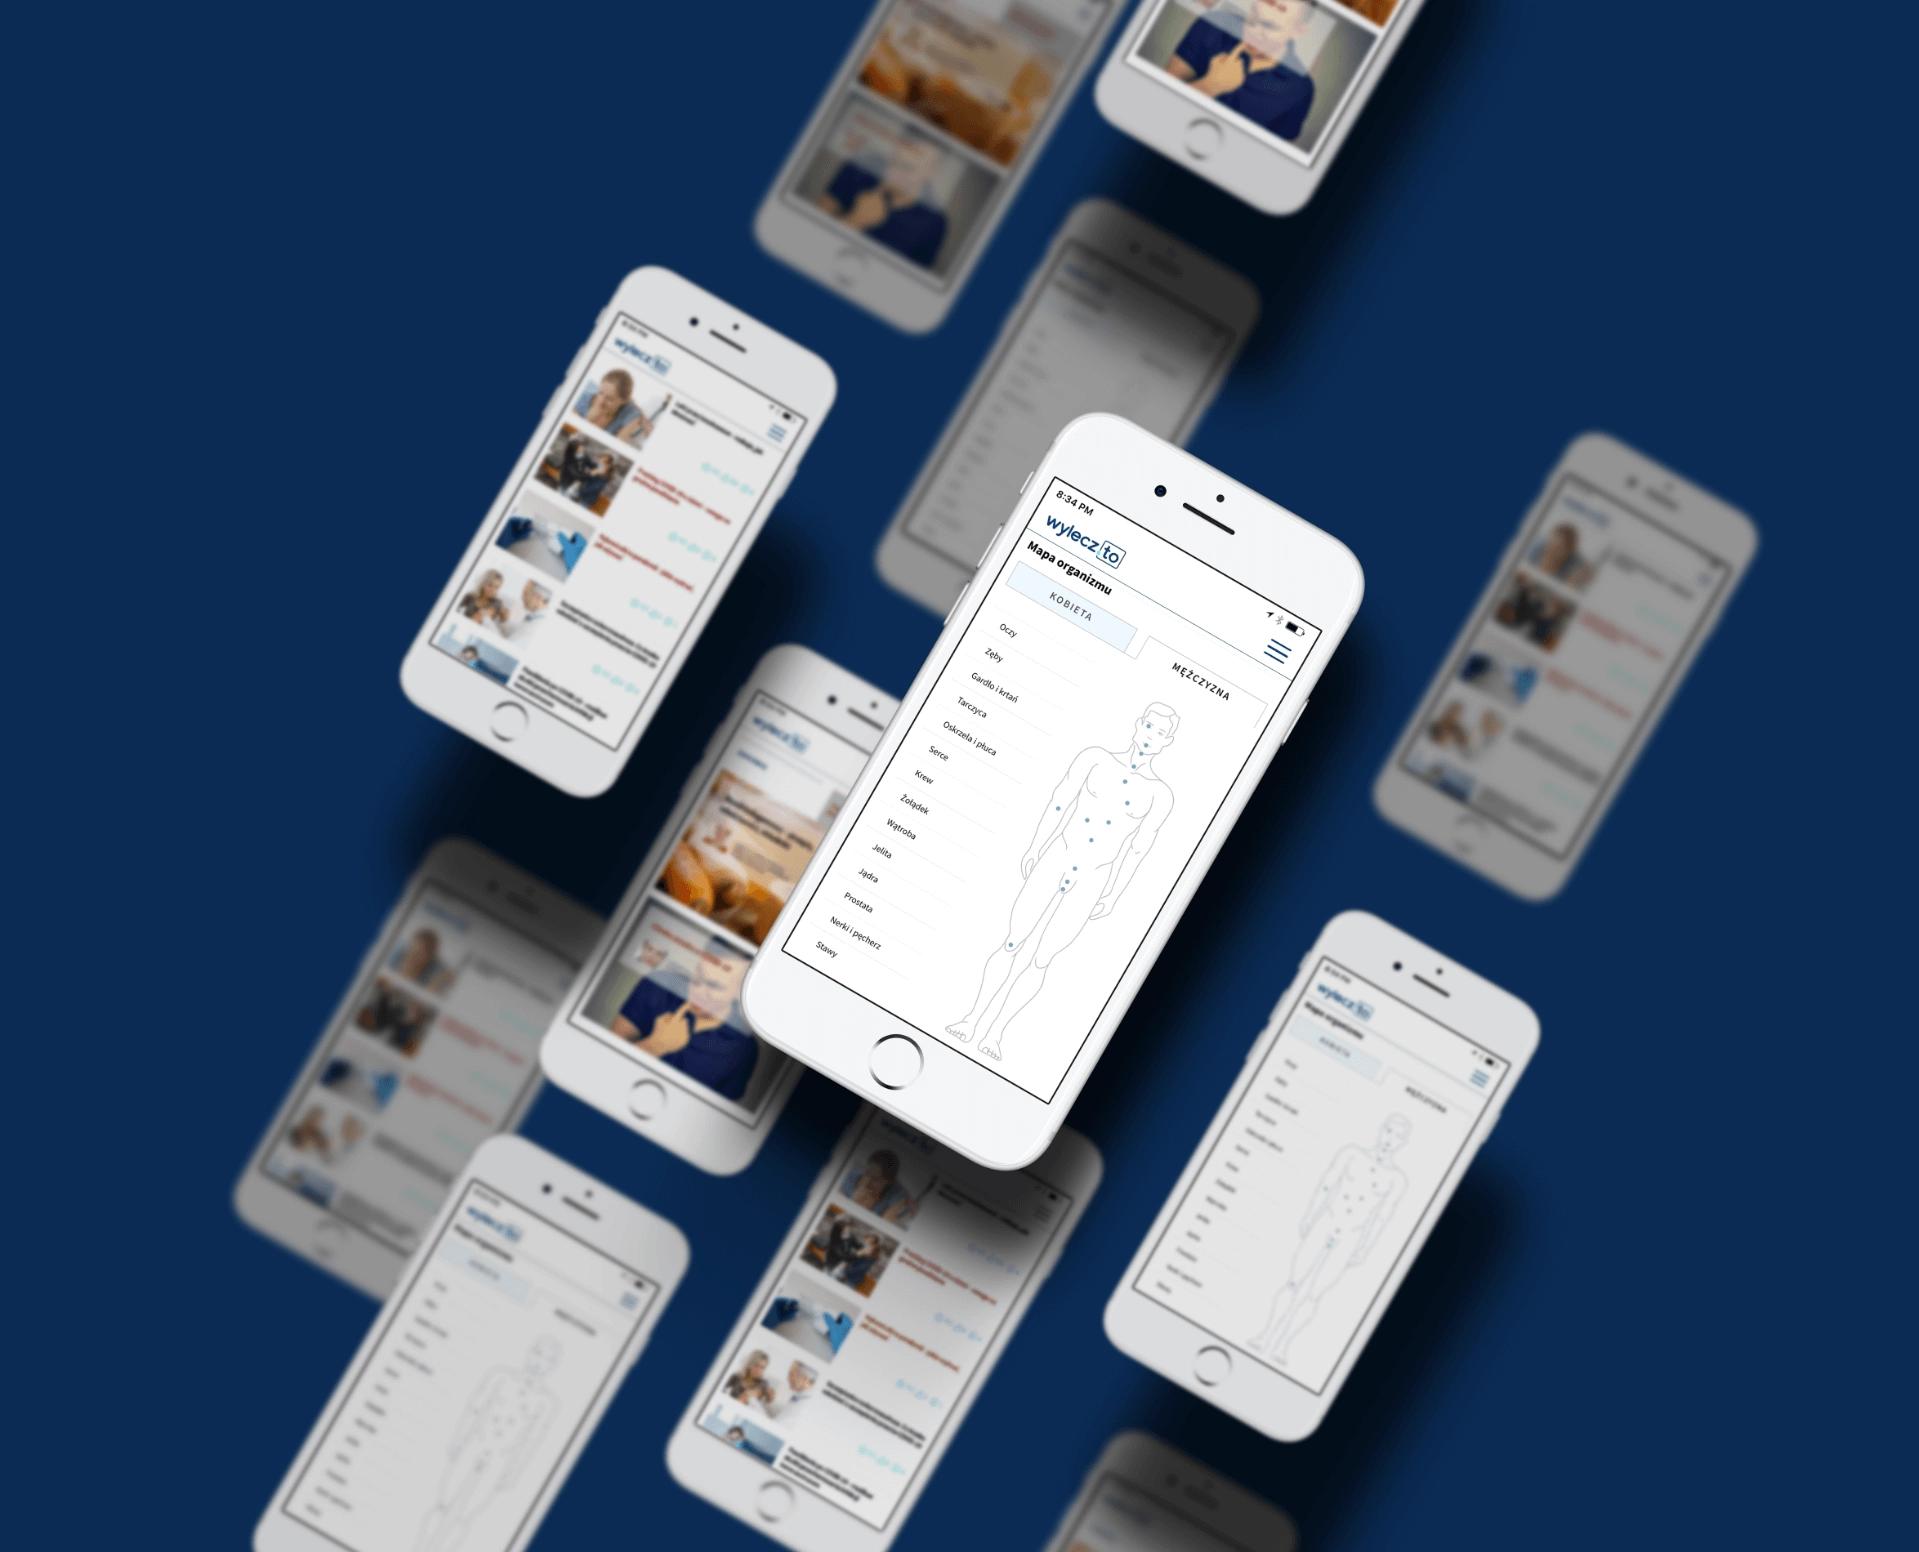 wylecz.to company website on mobile devices